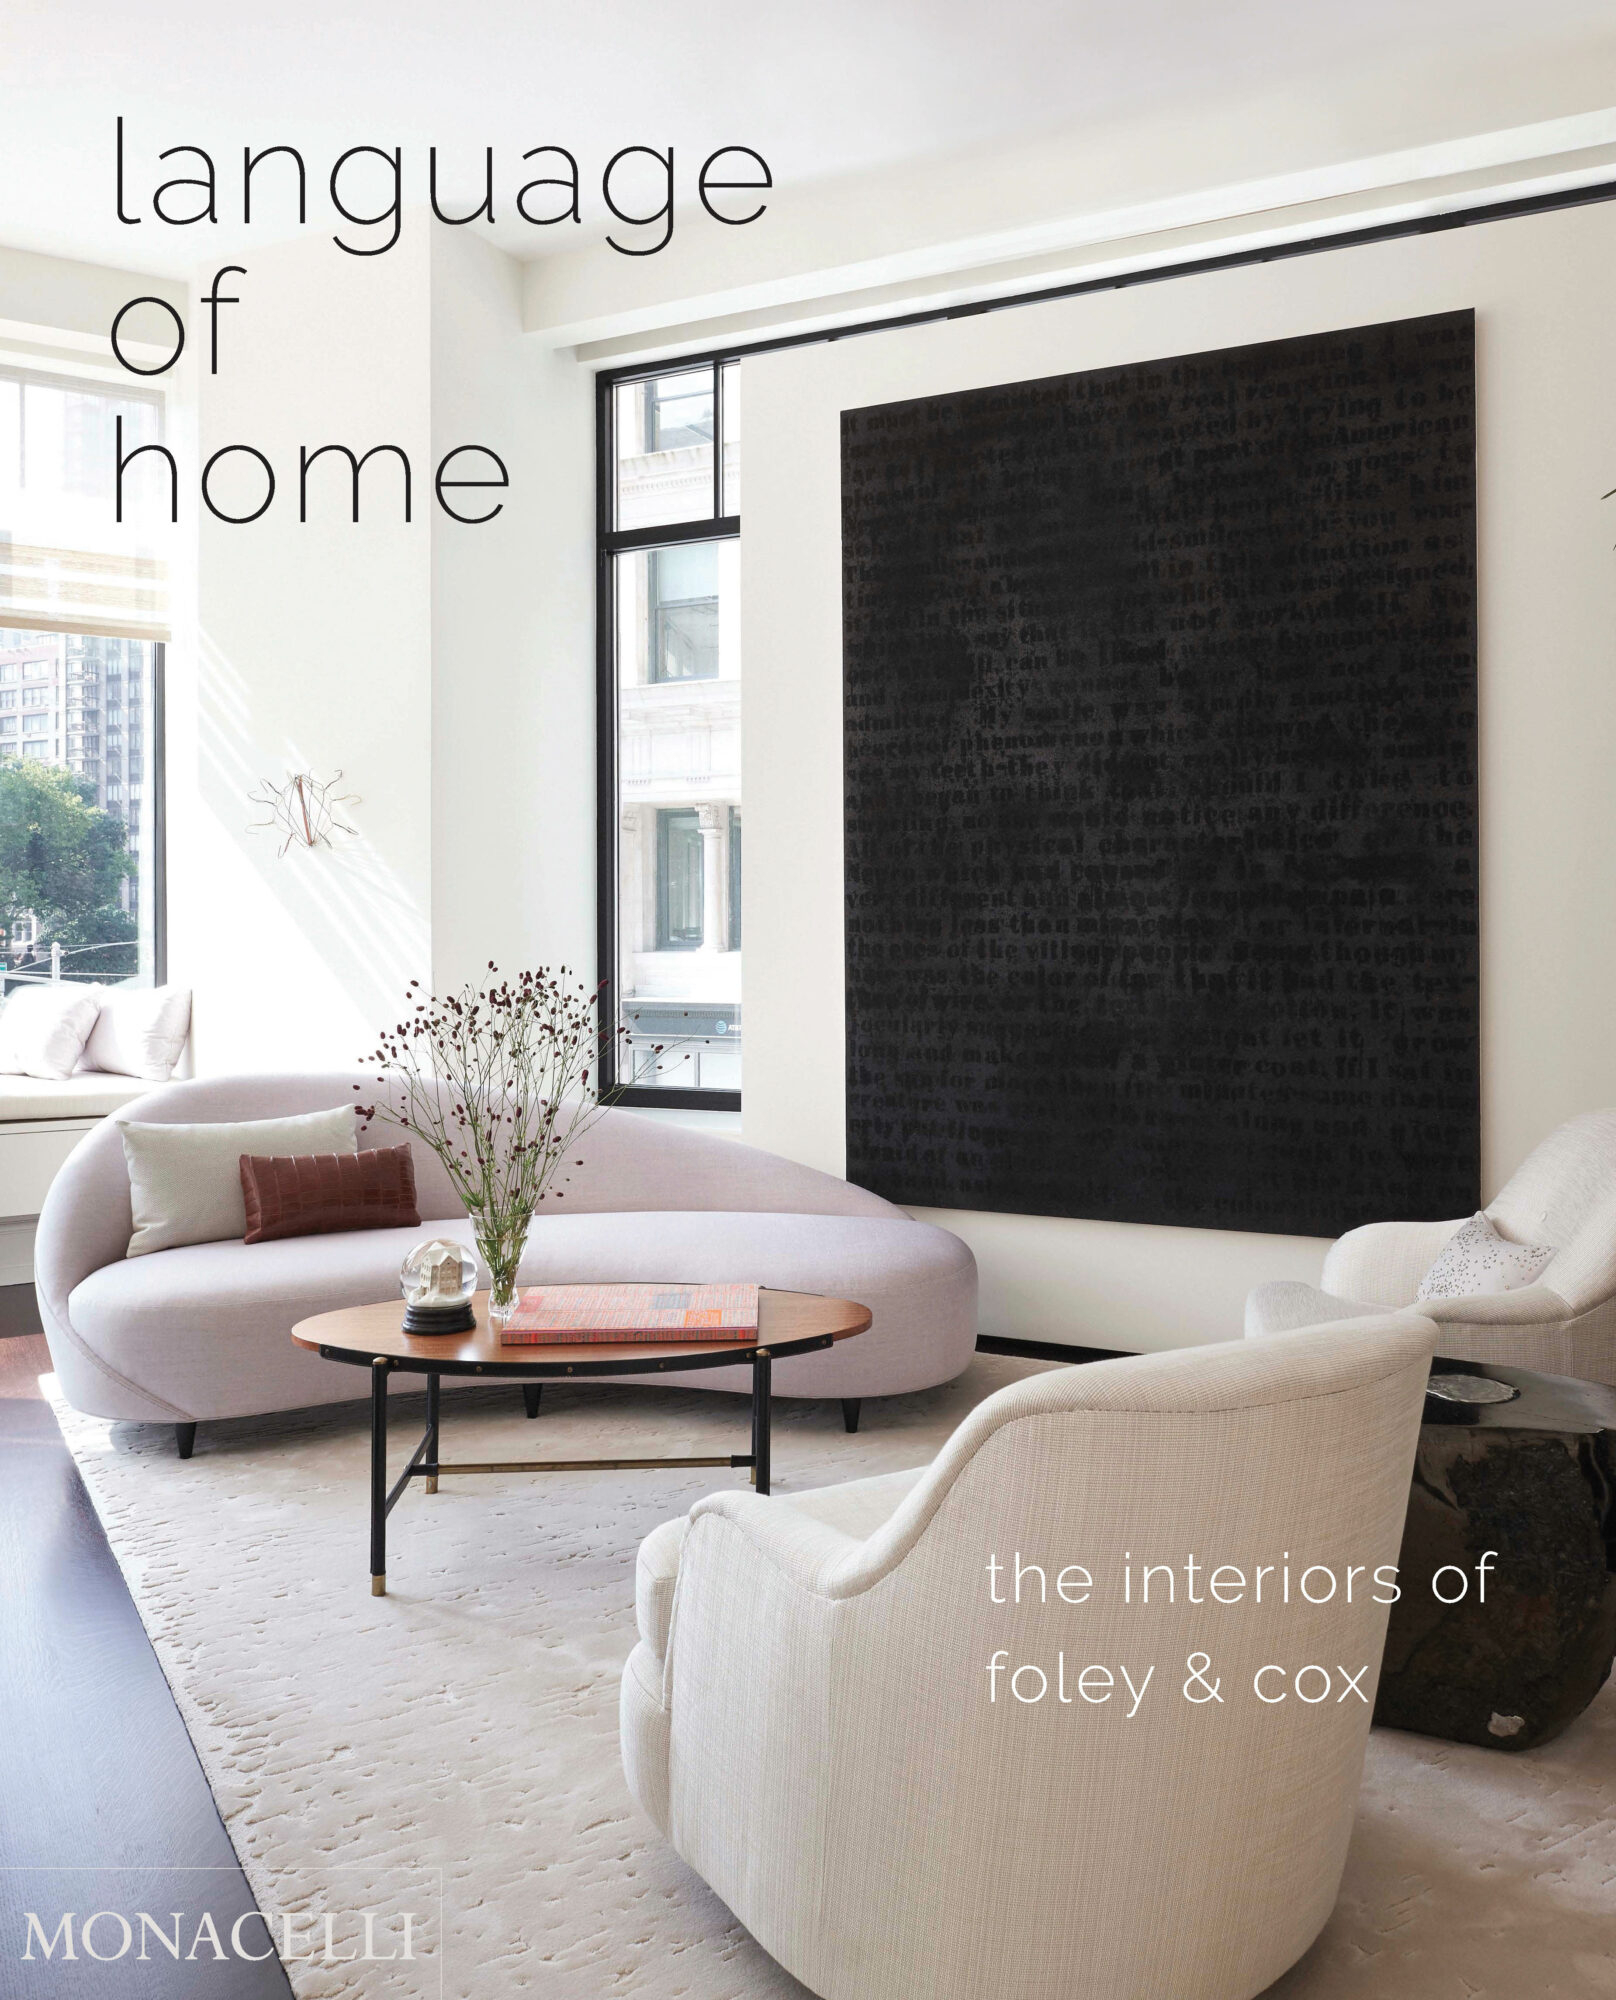 Book cover of Language of Home published by Monacelli Press